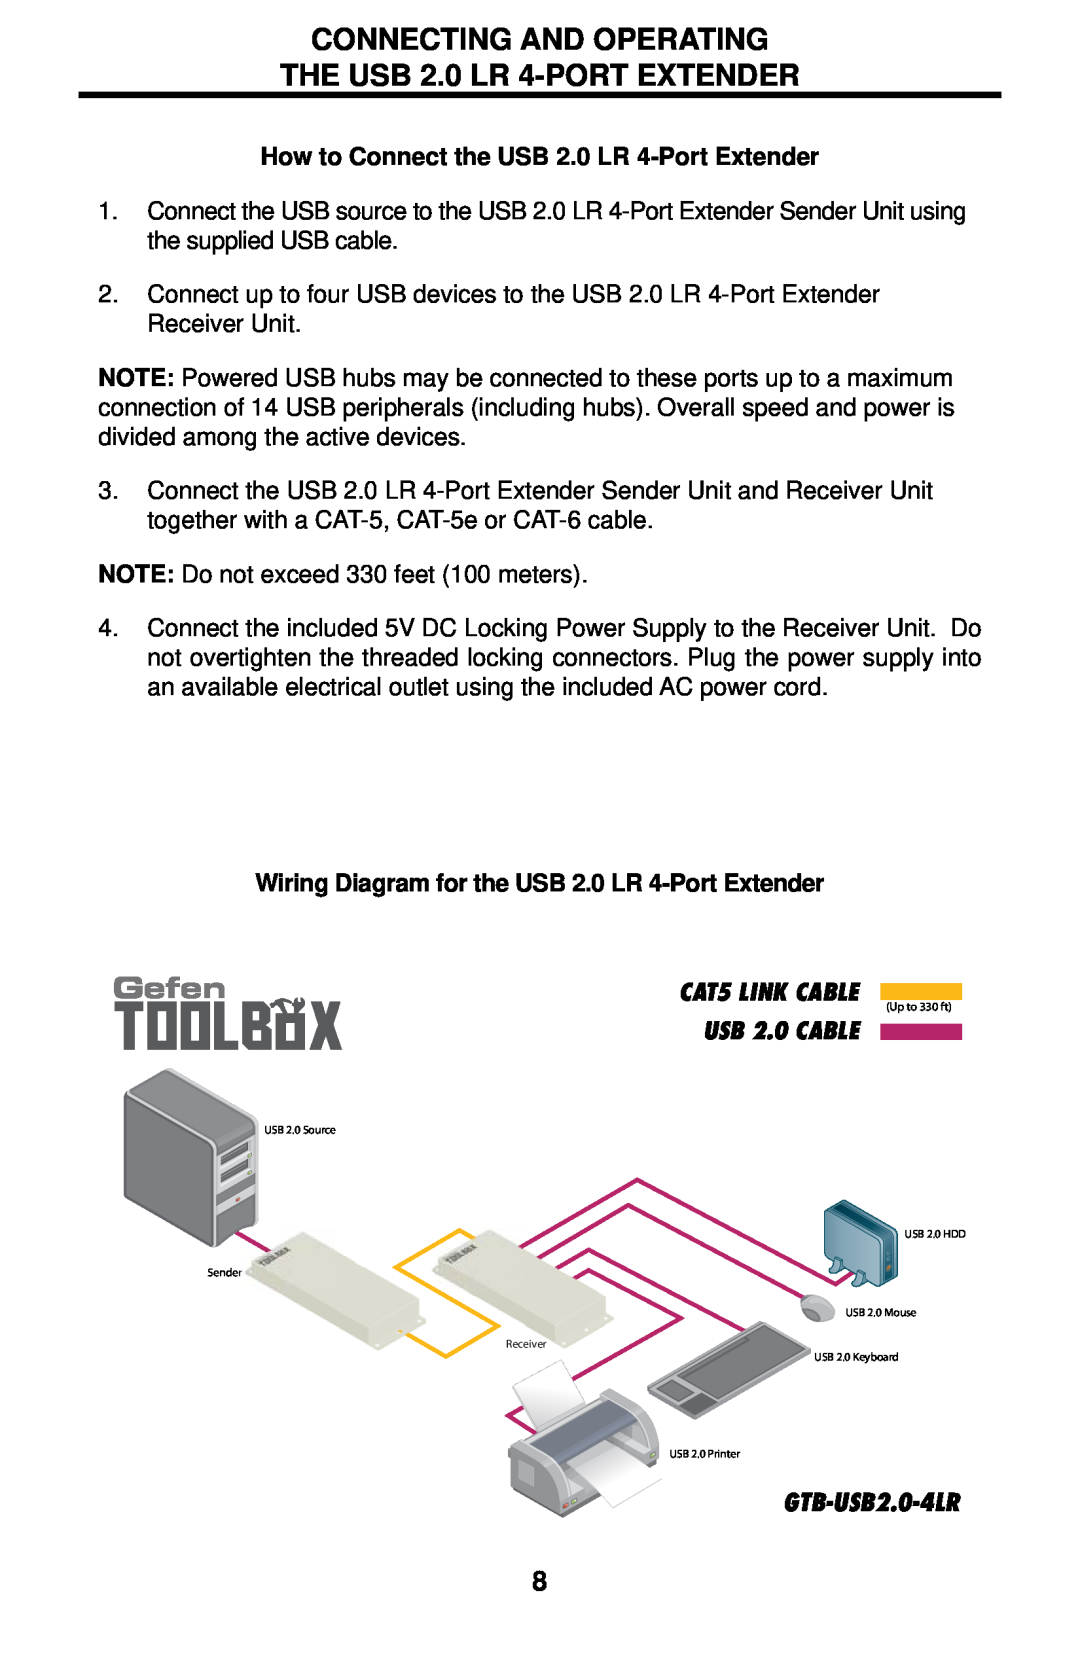 Gefen GTB-USB2.0-4LR user manual CONNECTING AND OPERATING THE USB 2.0 LR 4-PORT EXTENDER, USB 2.0 CABLE, Gefen 